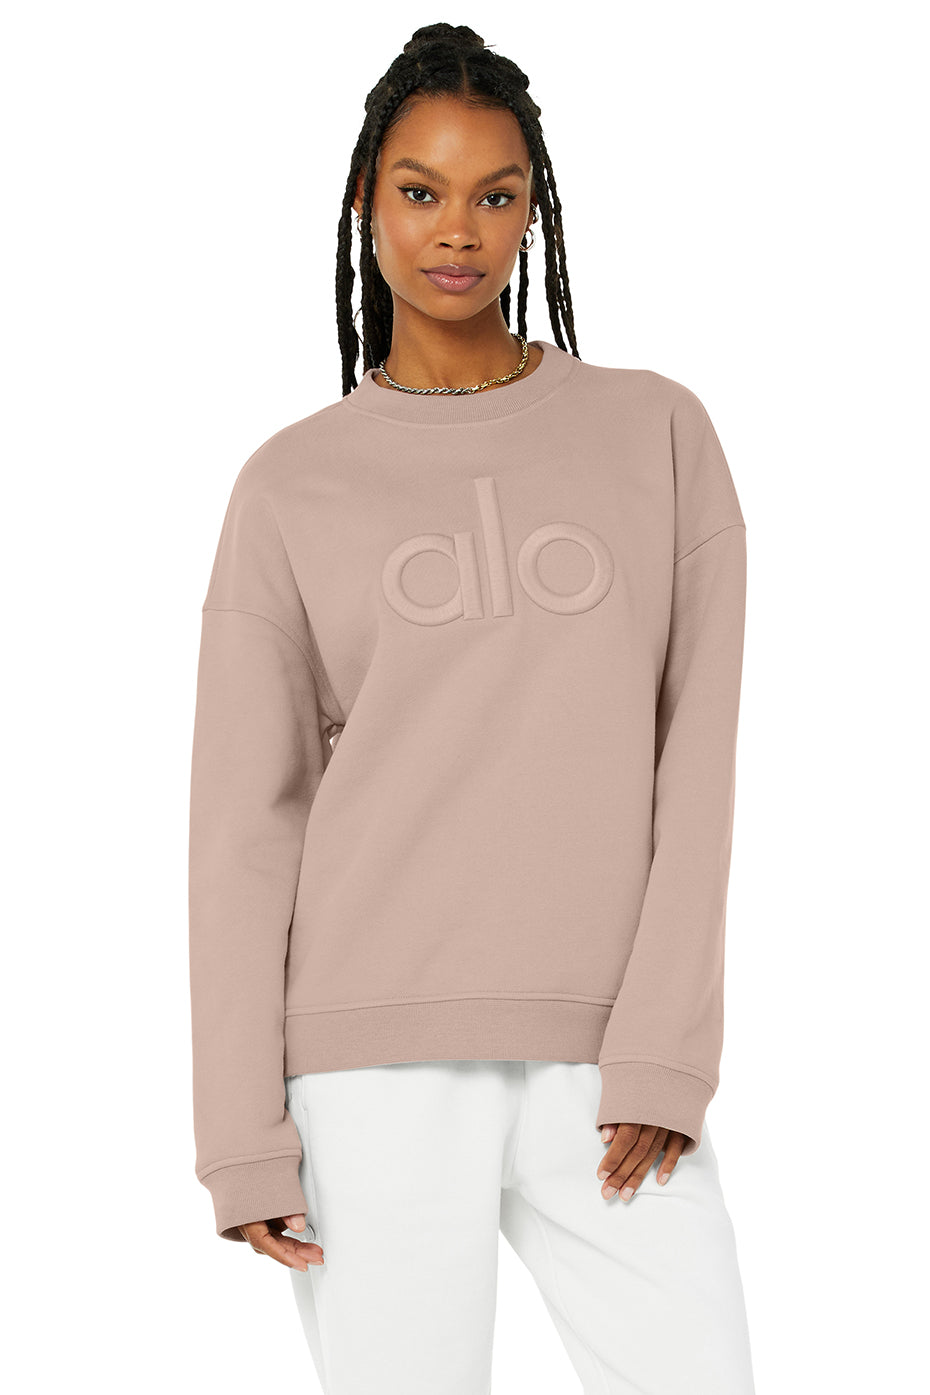 Renown Heavy Weight Emblem Crewneck Neck Pullover Top in Dusty Pink by Alo  Yoga